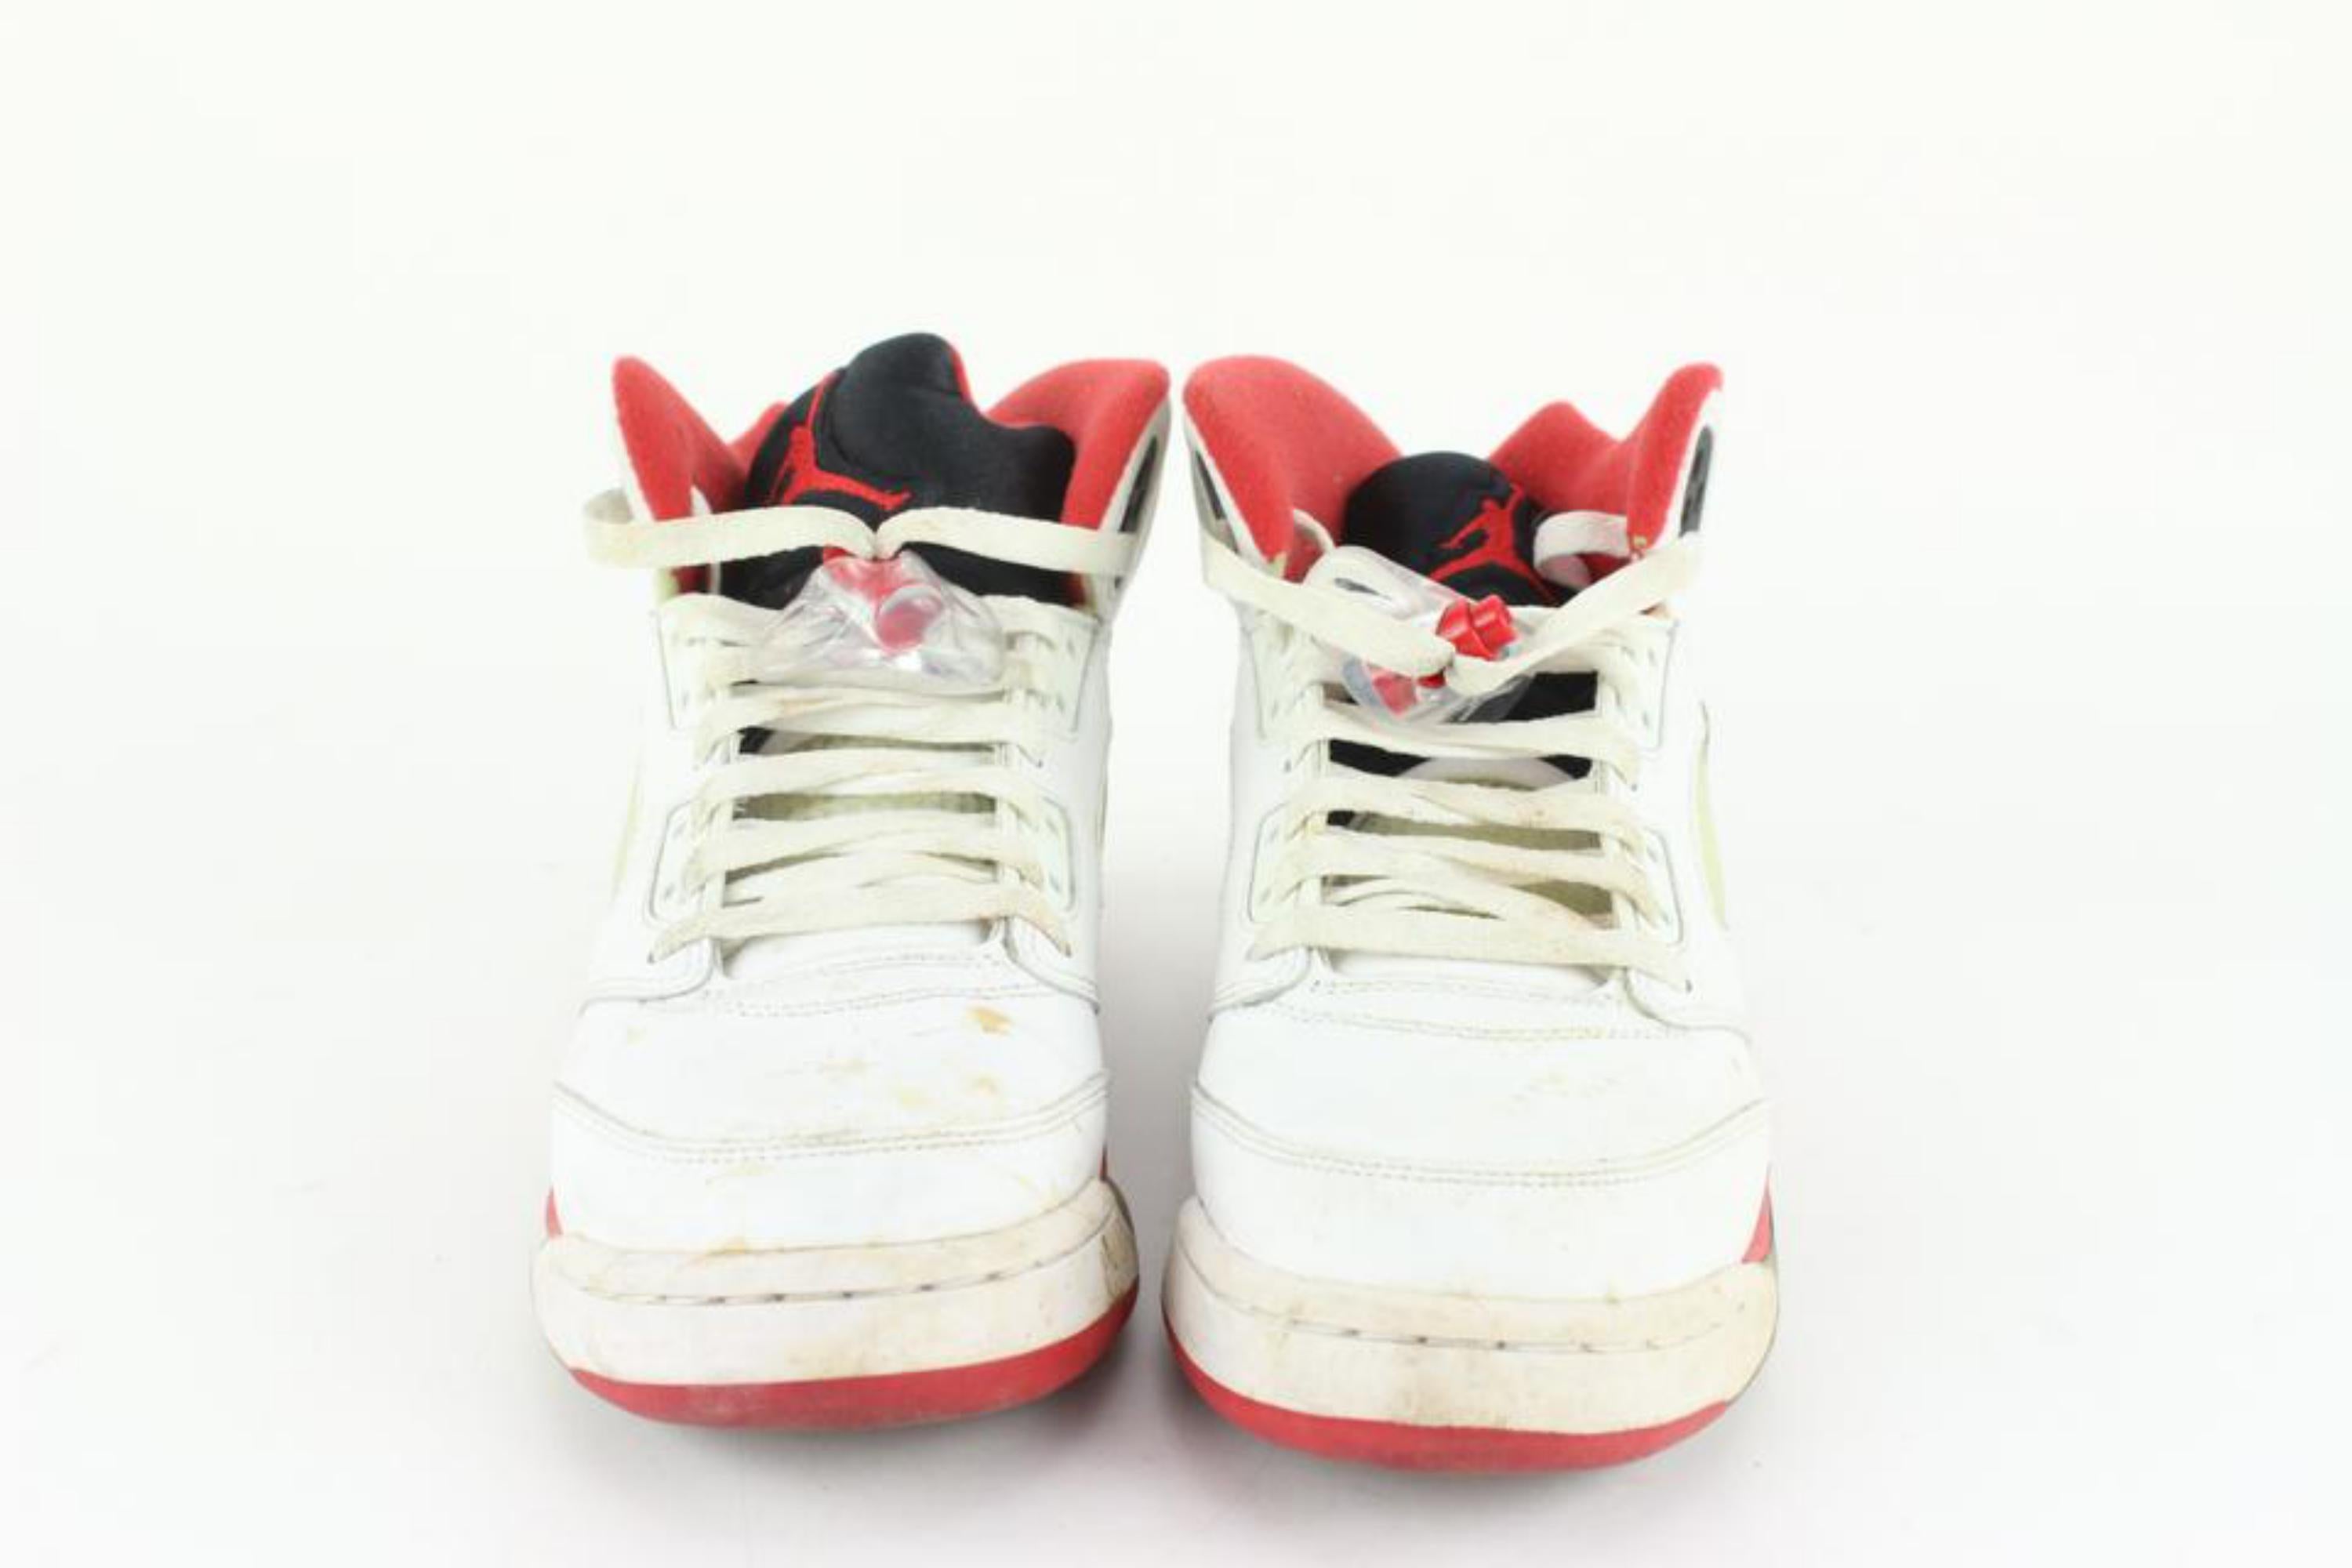 Nike 2013 Youth 6.5 US Fire Red Black Tongue Air Jordan V 5 440888-120 In Good Condition In Dix hills, NY